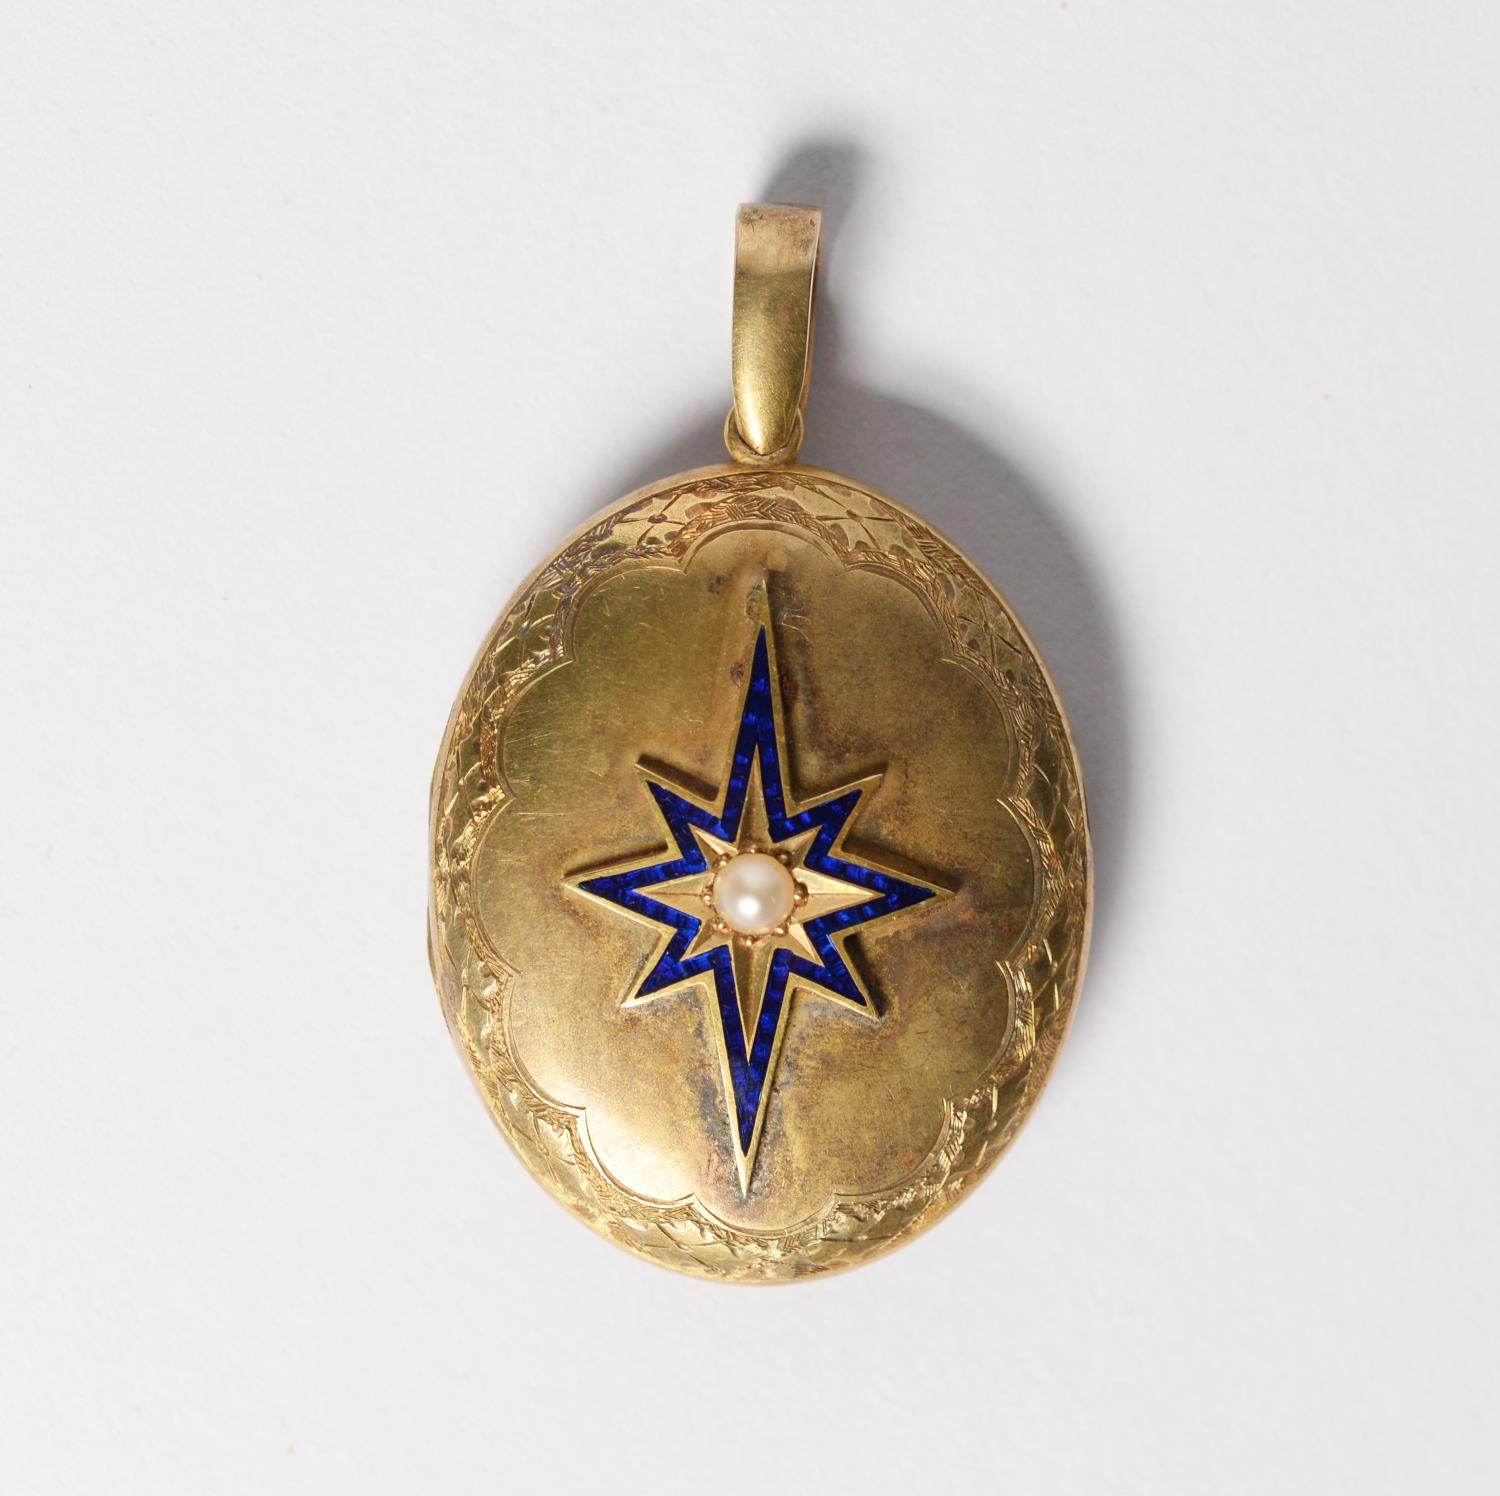 VICTORIAN GOLD COLOURED METAL OVAL LOCKET PENDANT, the font applied with a blue enamelled star burst